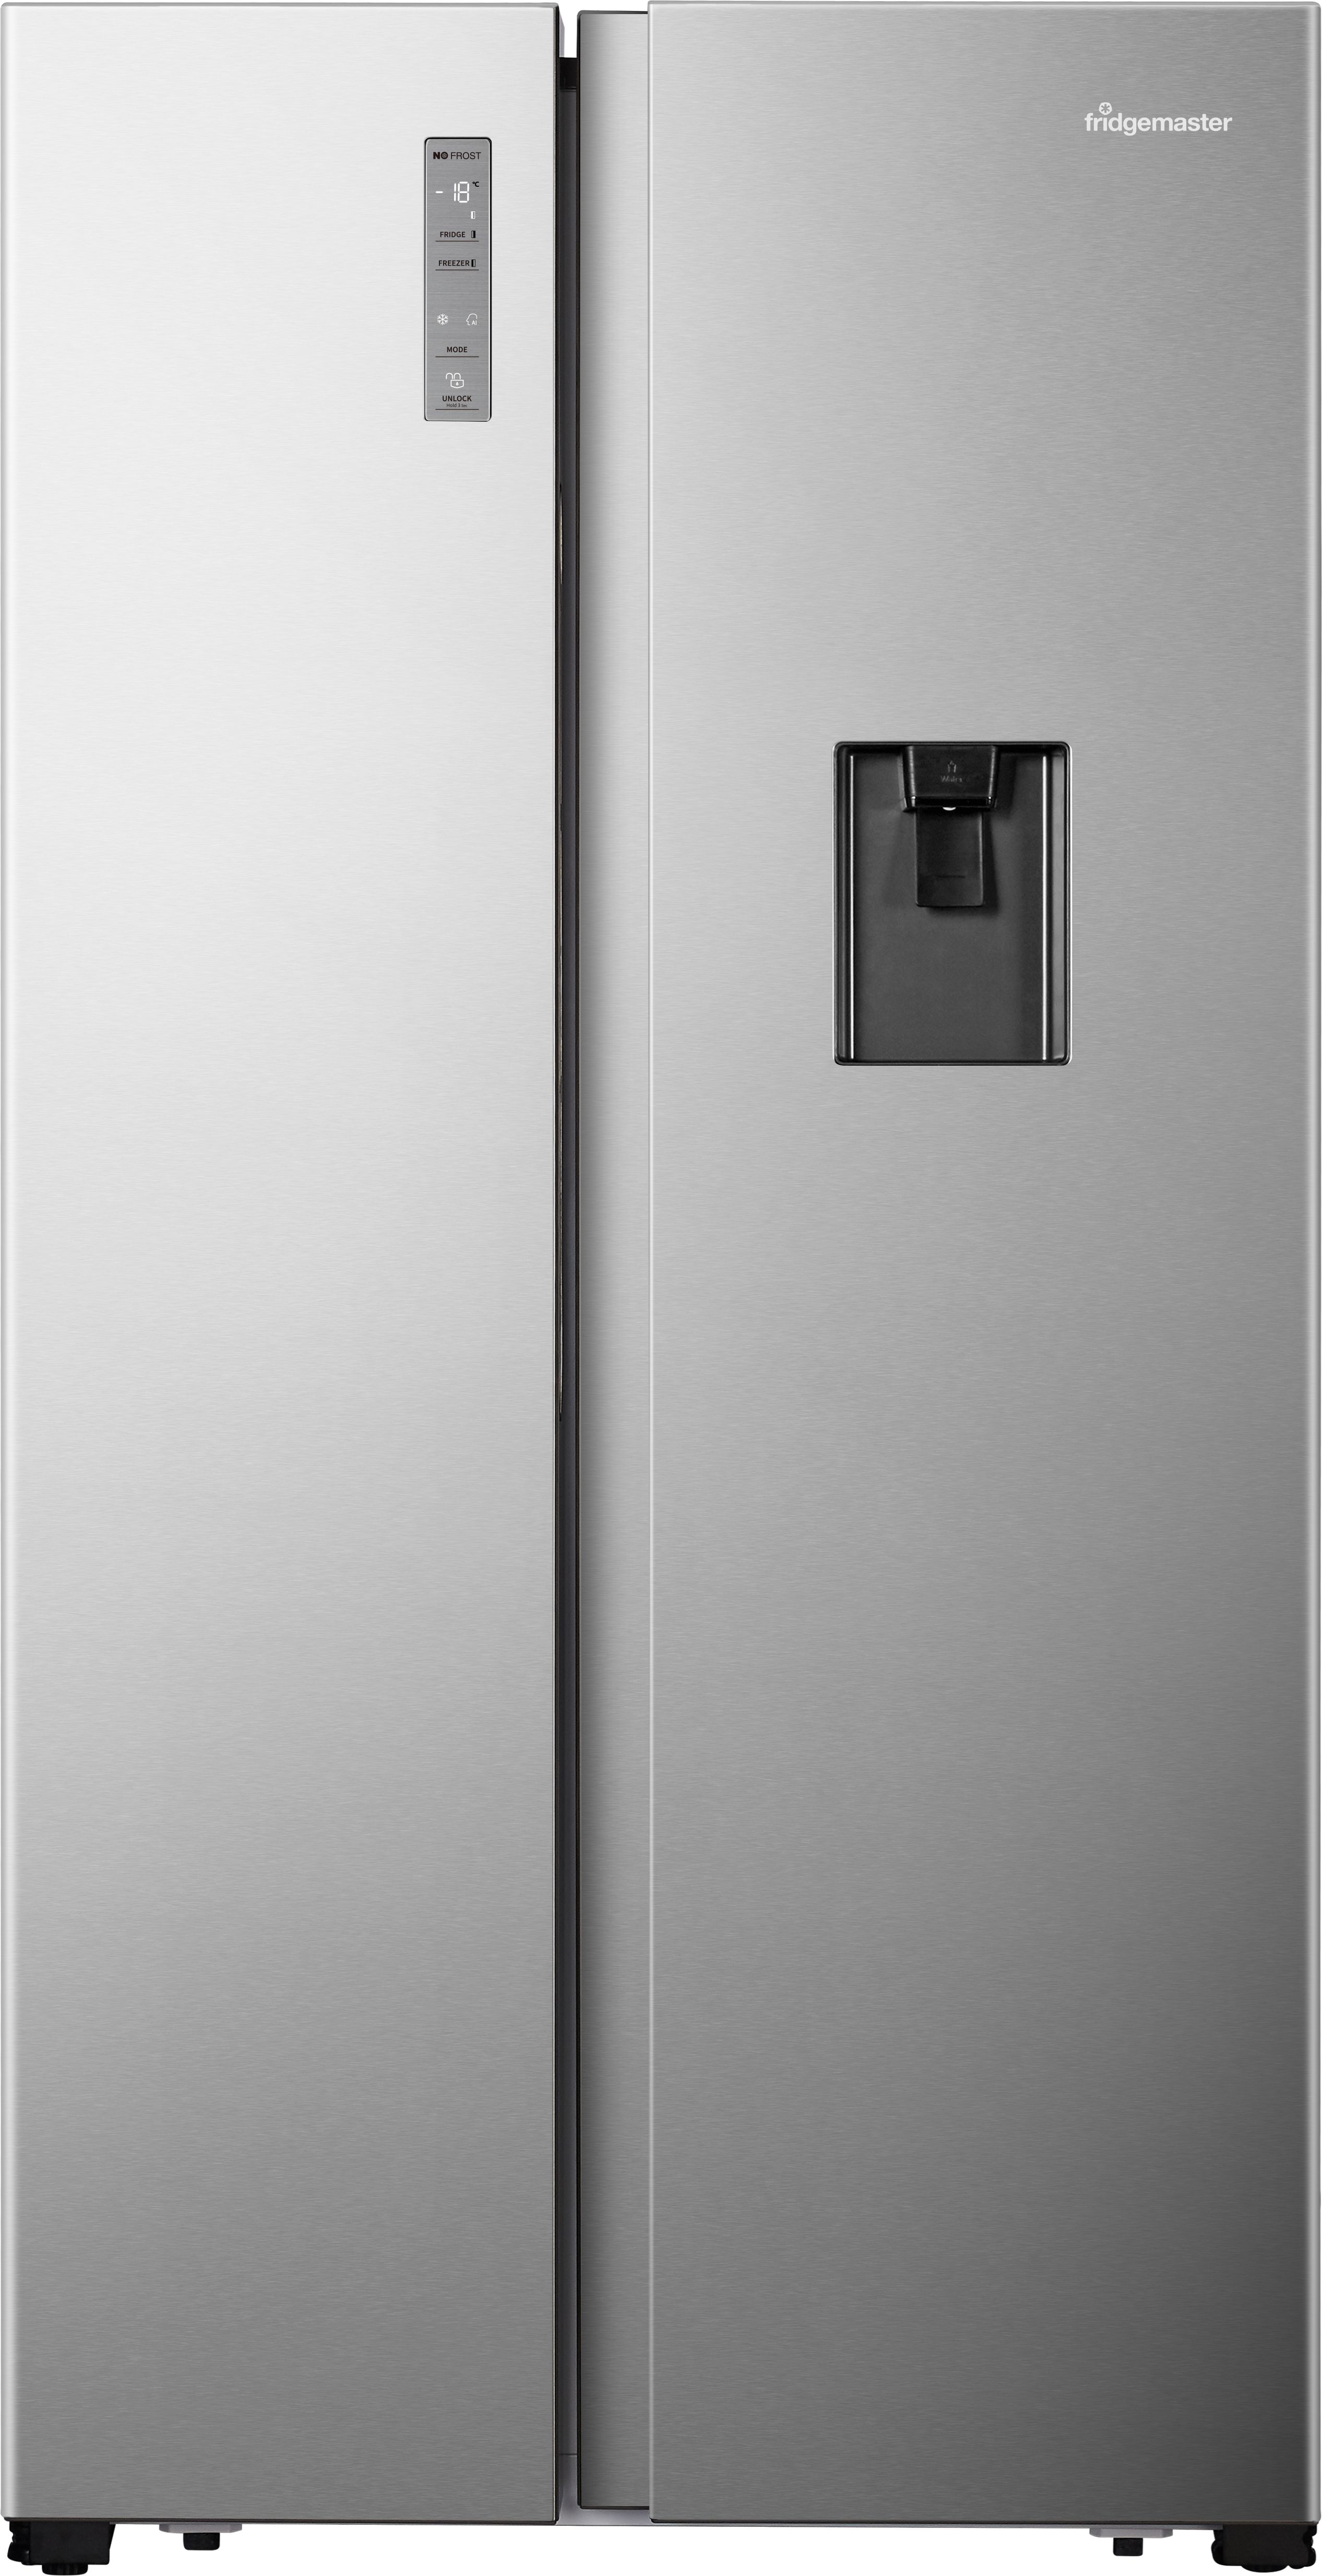 Fridgemaster MS91520DES Non-Plumbed Total No Frost American Fridge Freezer - Silver - E Rated Silver